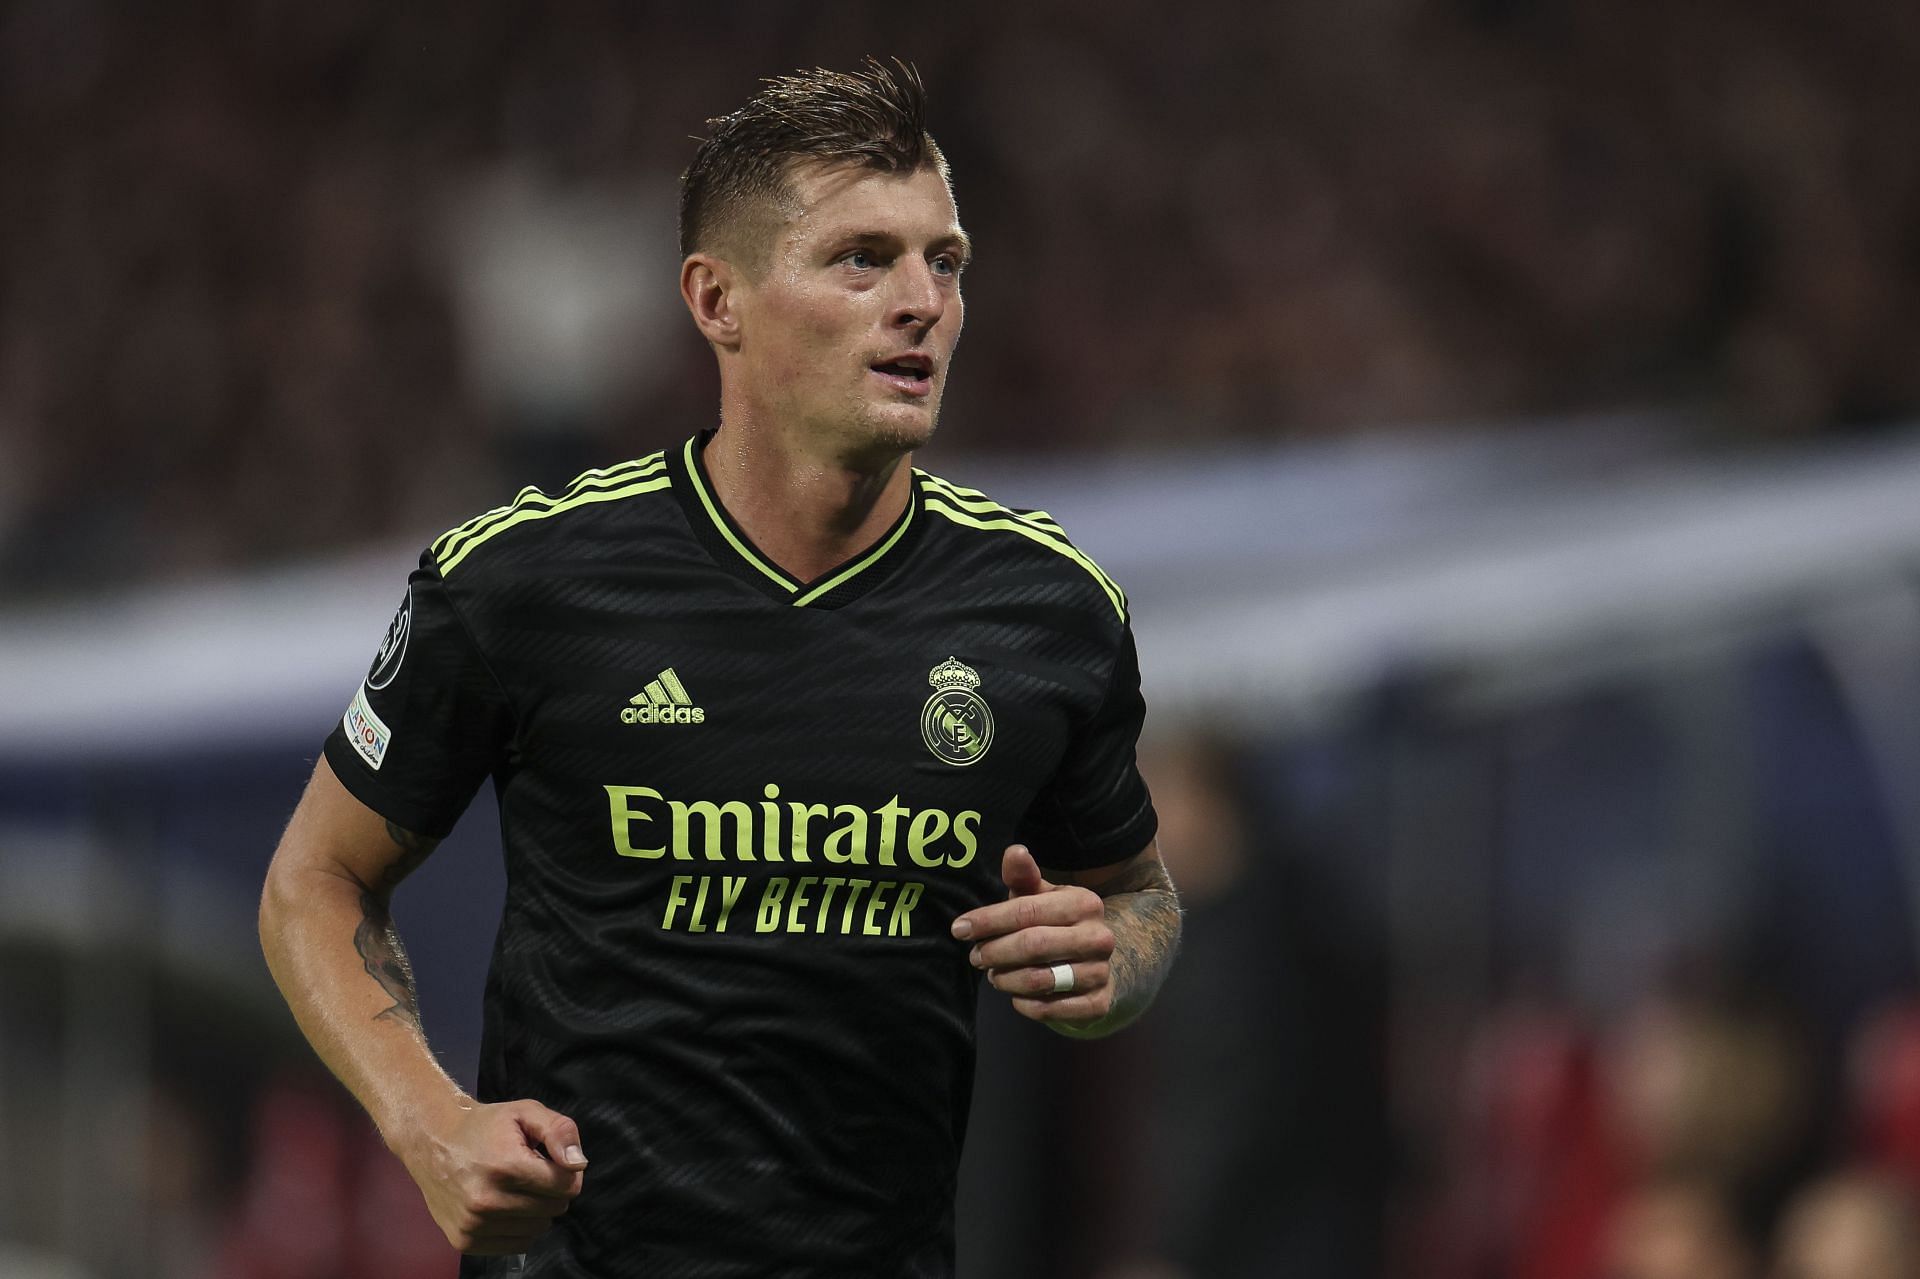 Toni Kroos has been a first-team regular at the Santiago Bernabeu for ages.